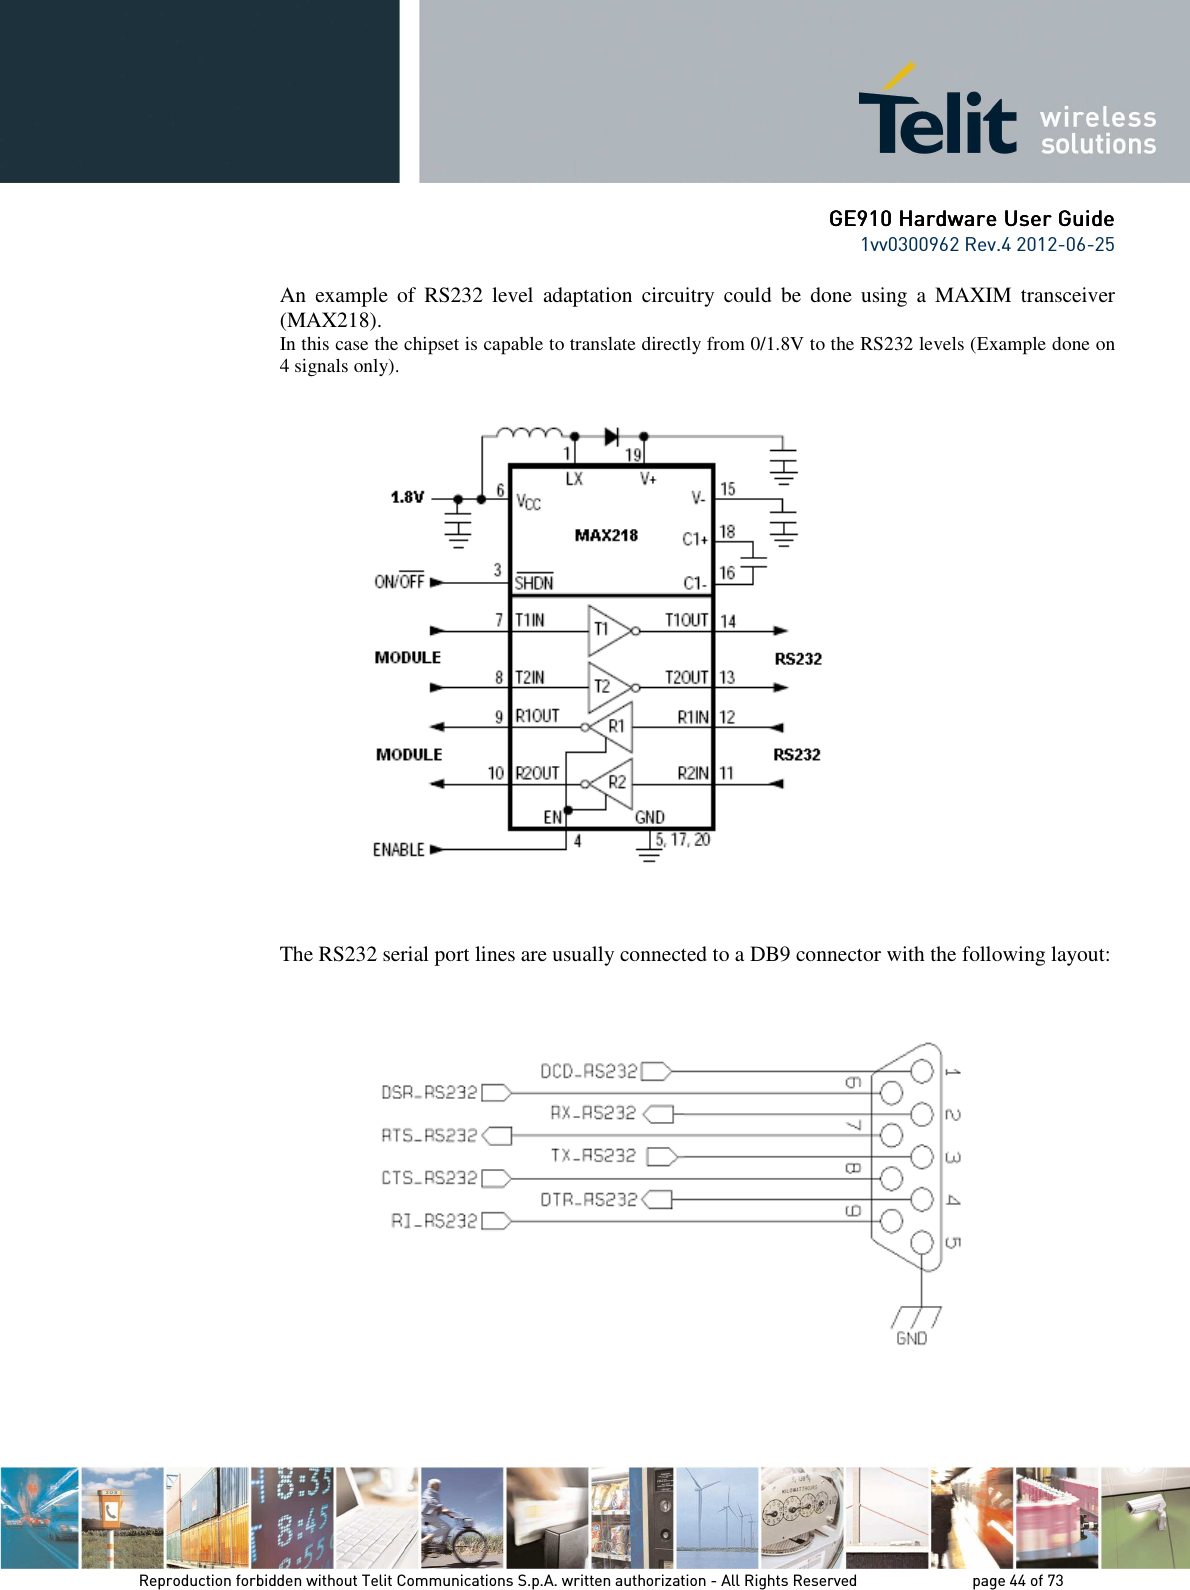      GE9GE9GE9GE910 Hardware User Guide10 Hardware User Guide10 Hardware User Guide10 Hardware User Guide    1vv0300962 Rev.4 2012-06-25    Reproduction forbidden without Telit Communications S.p.A. written authorization - All Rights Reserved    page 44 of 73 Mod. 0805 2011-07 Rev.2 An  example  of  RS232  level  adaptation  circuitry  could  be  done  using  a  MAXIM  transceiver (MAX218).  In this case the chipset is capable to translate directly from 0/1.8V to the RS232 levels (Example done on 4 signals only).        The RS232 serial port lines are usually connected to a DB9 connector with the following layout:     